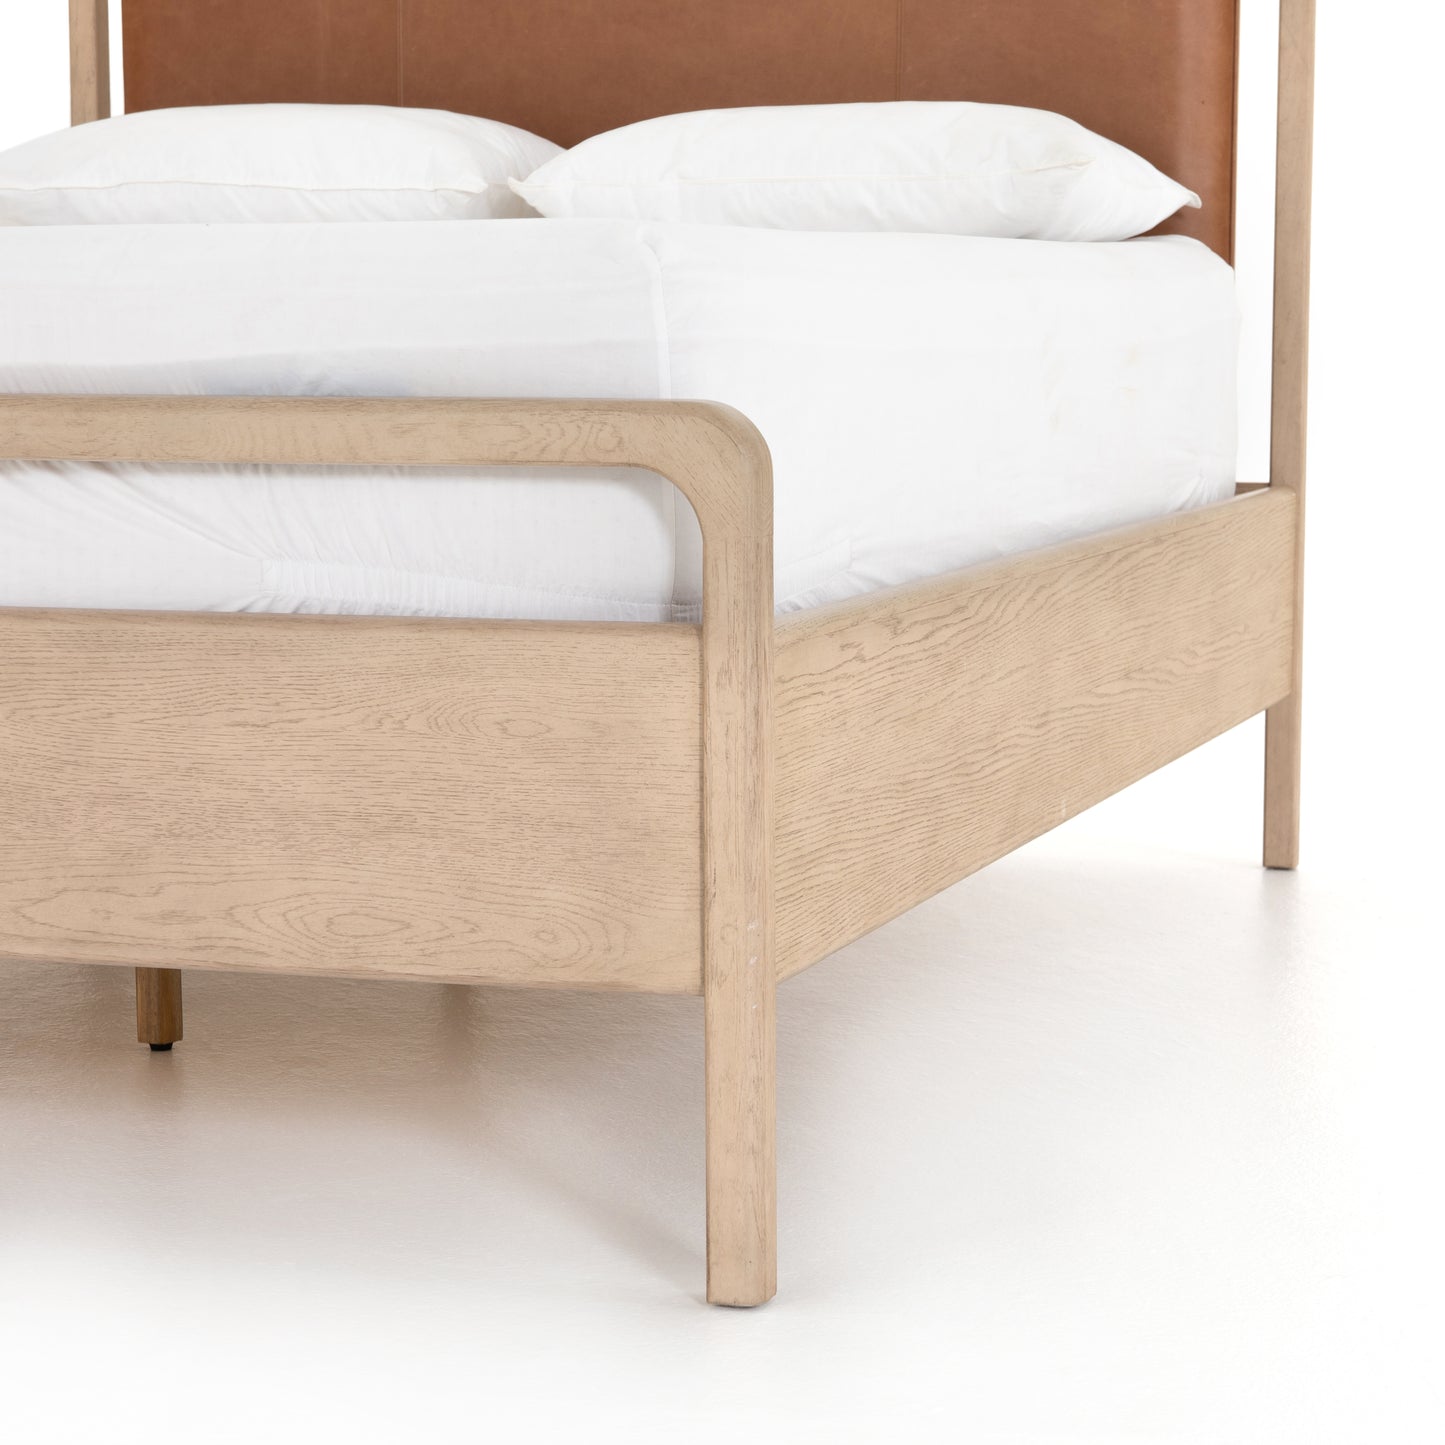 Load image into Gallery viewer, Rosedale Bed Bedding Four Hands     Four Hands, Burke Decor, Mid Century Modern Furniture, Old Bones Furniture Company, Old Bones Co, Modern Mid Century, Designer Furniture, https://www.oldbonesco.com/
